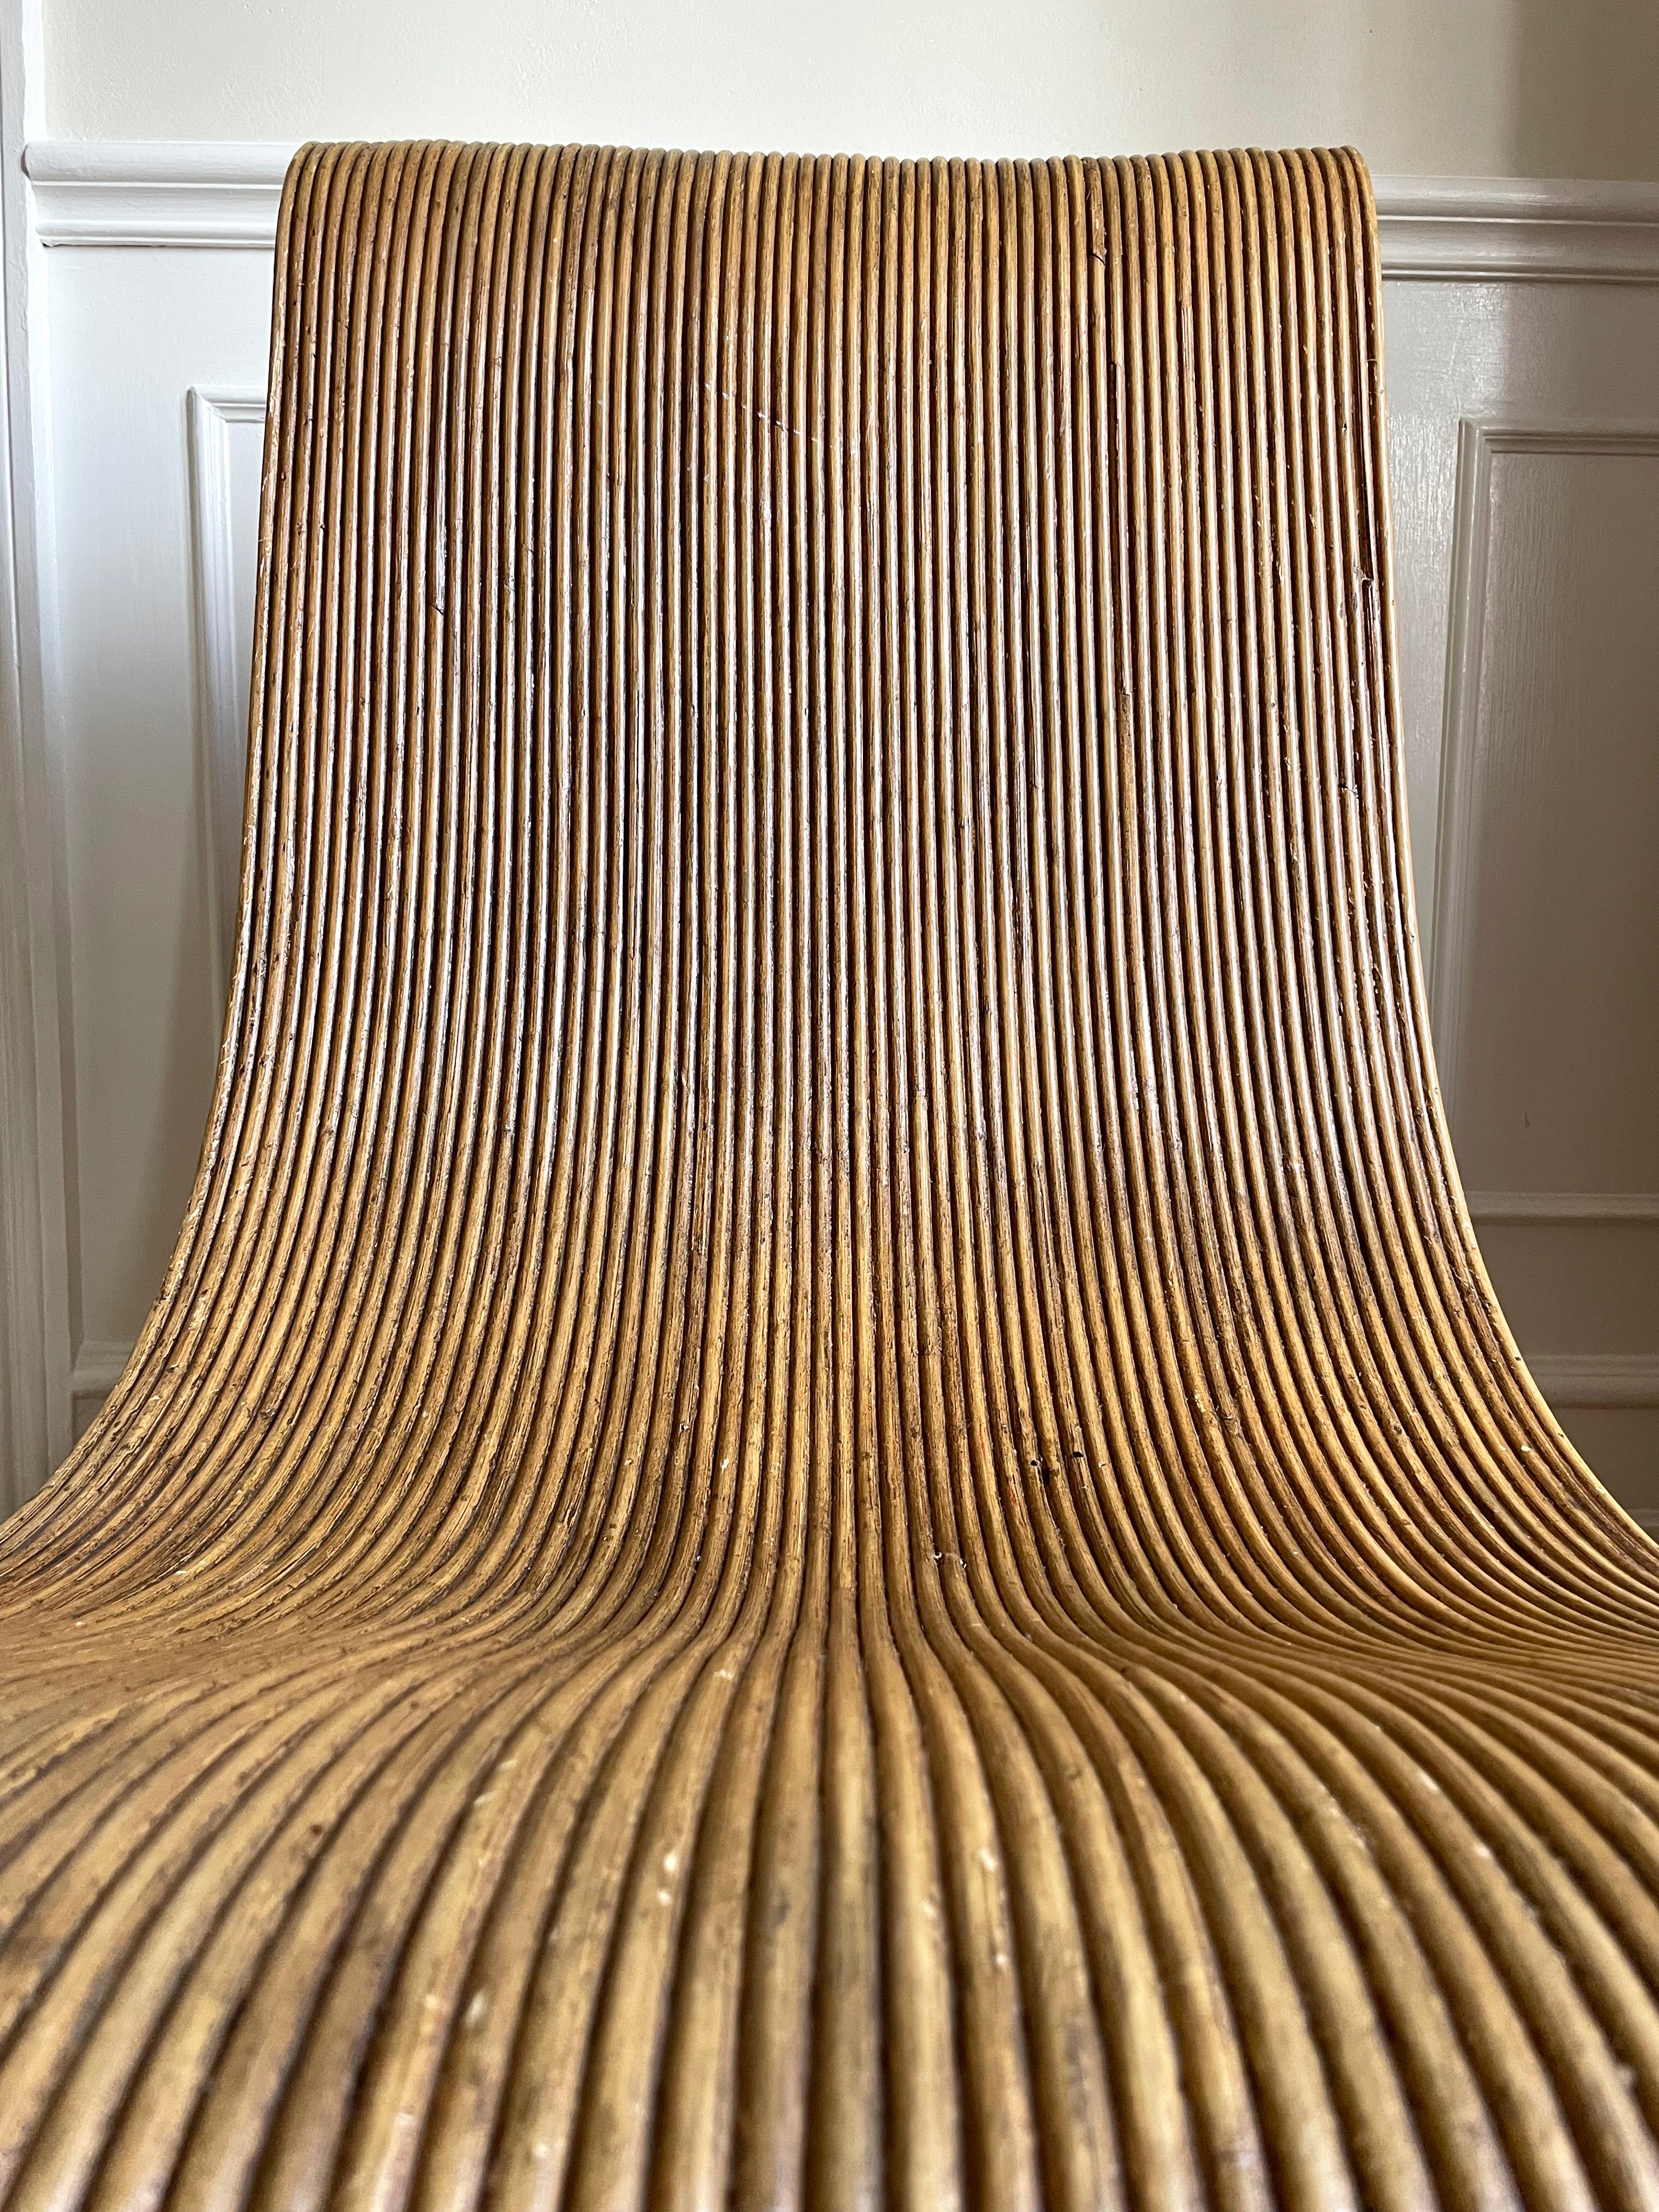 Bamboo Vivai del Sud Pencil Reed Lounge Chair, Italy, 1960s